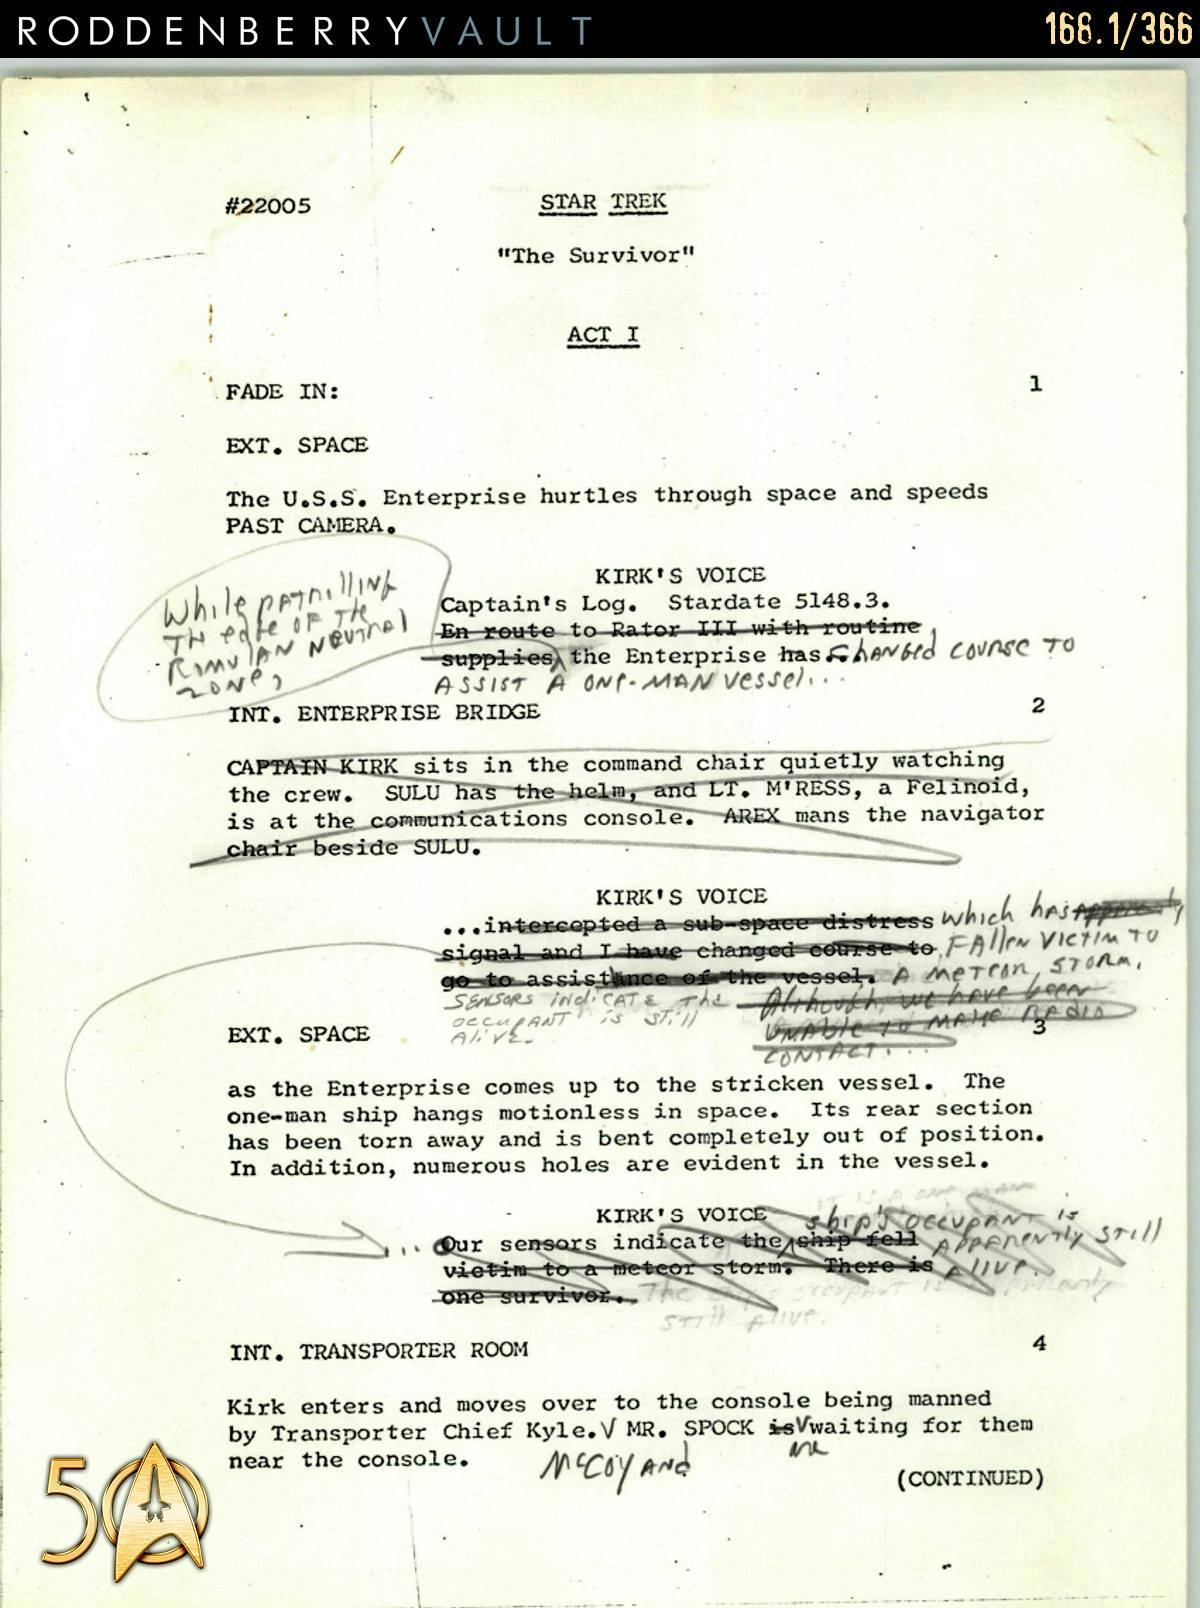 From the Roddenberry 366 Vault - The Animated Series - 'The Survivor' script with notes from Gene Roddenberry